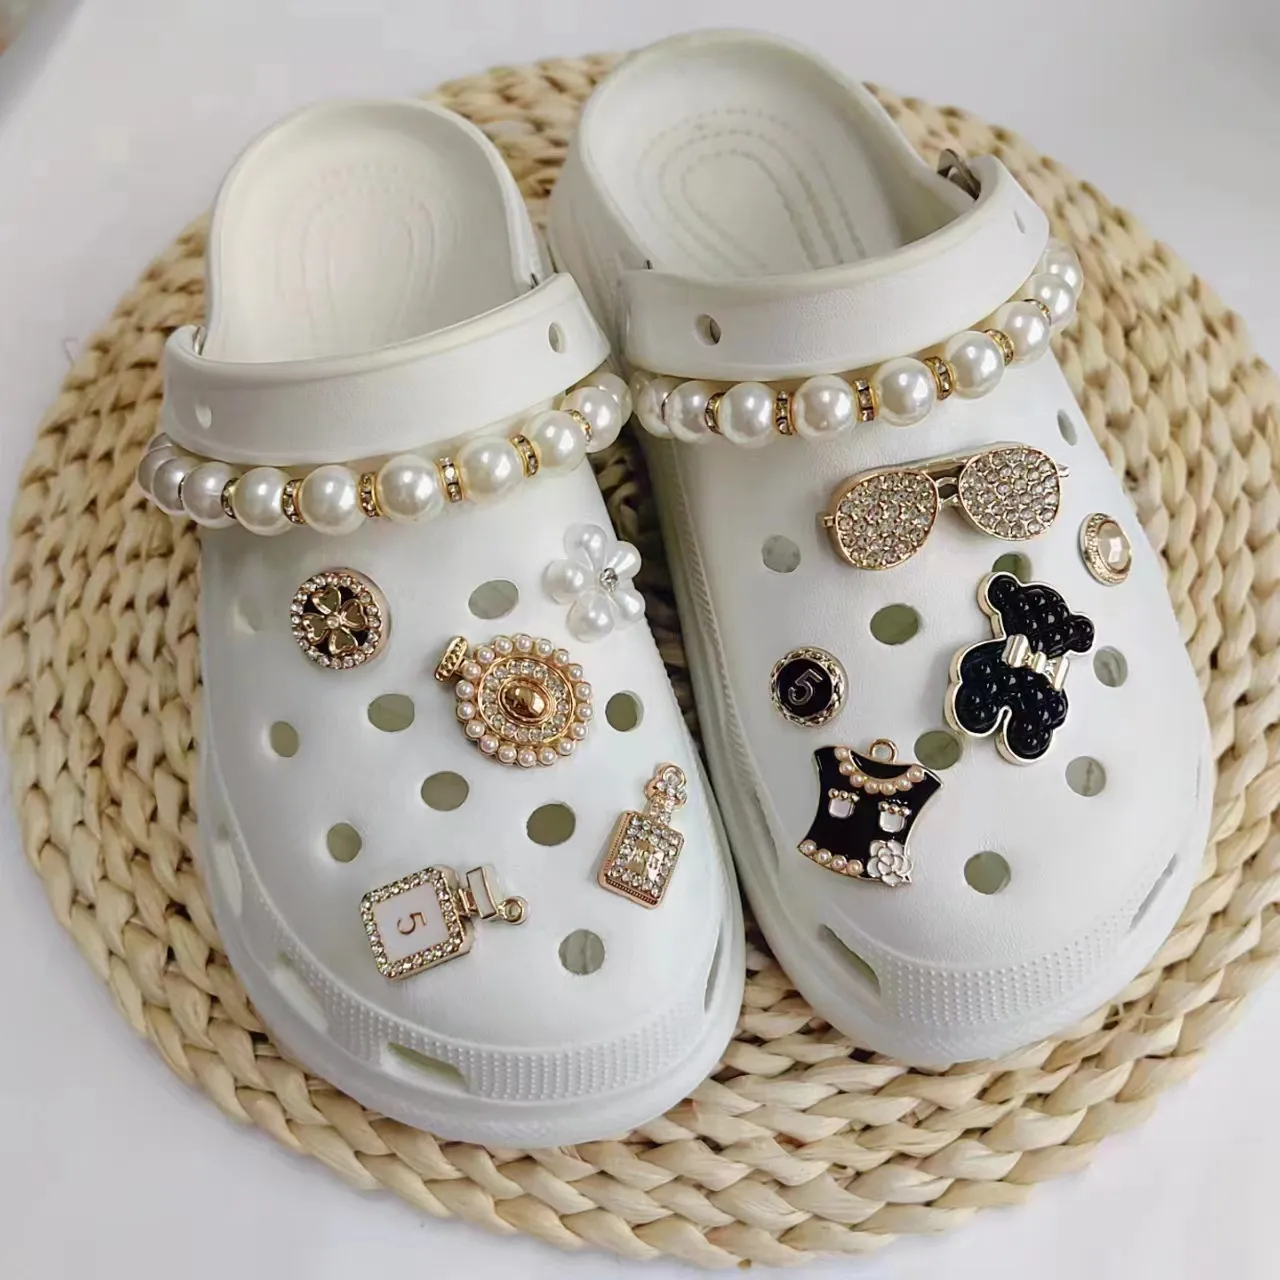 Wholesale Rhinestone Pearl Shoe Croc Bling Charms Set For Crocs Perfect For  Clogs And Pins From Yanming1113, $2.8